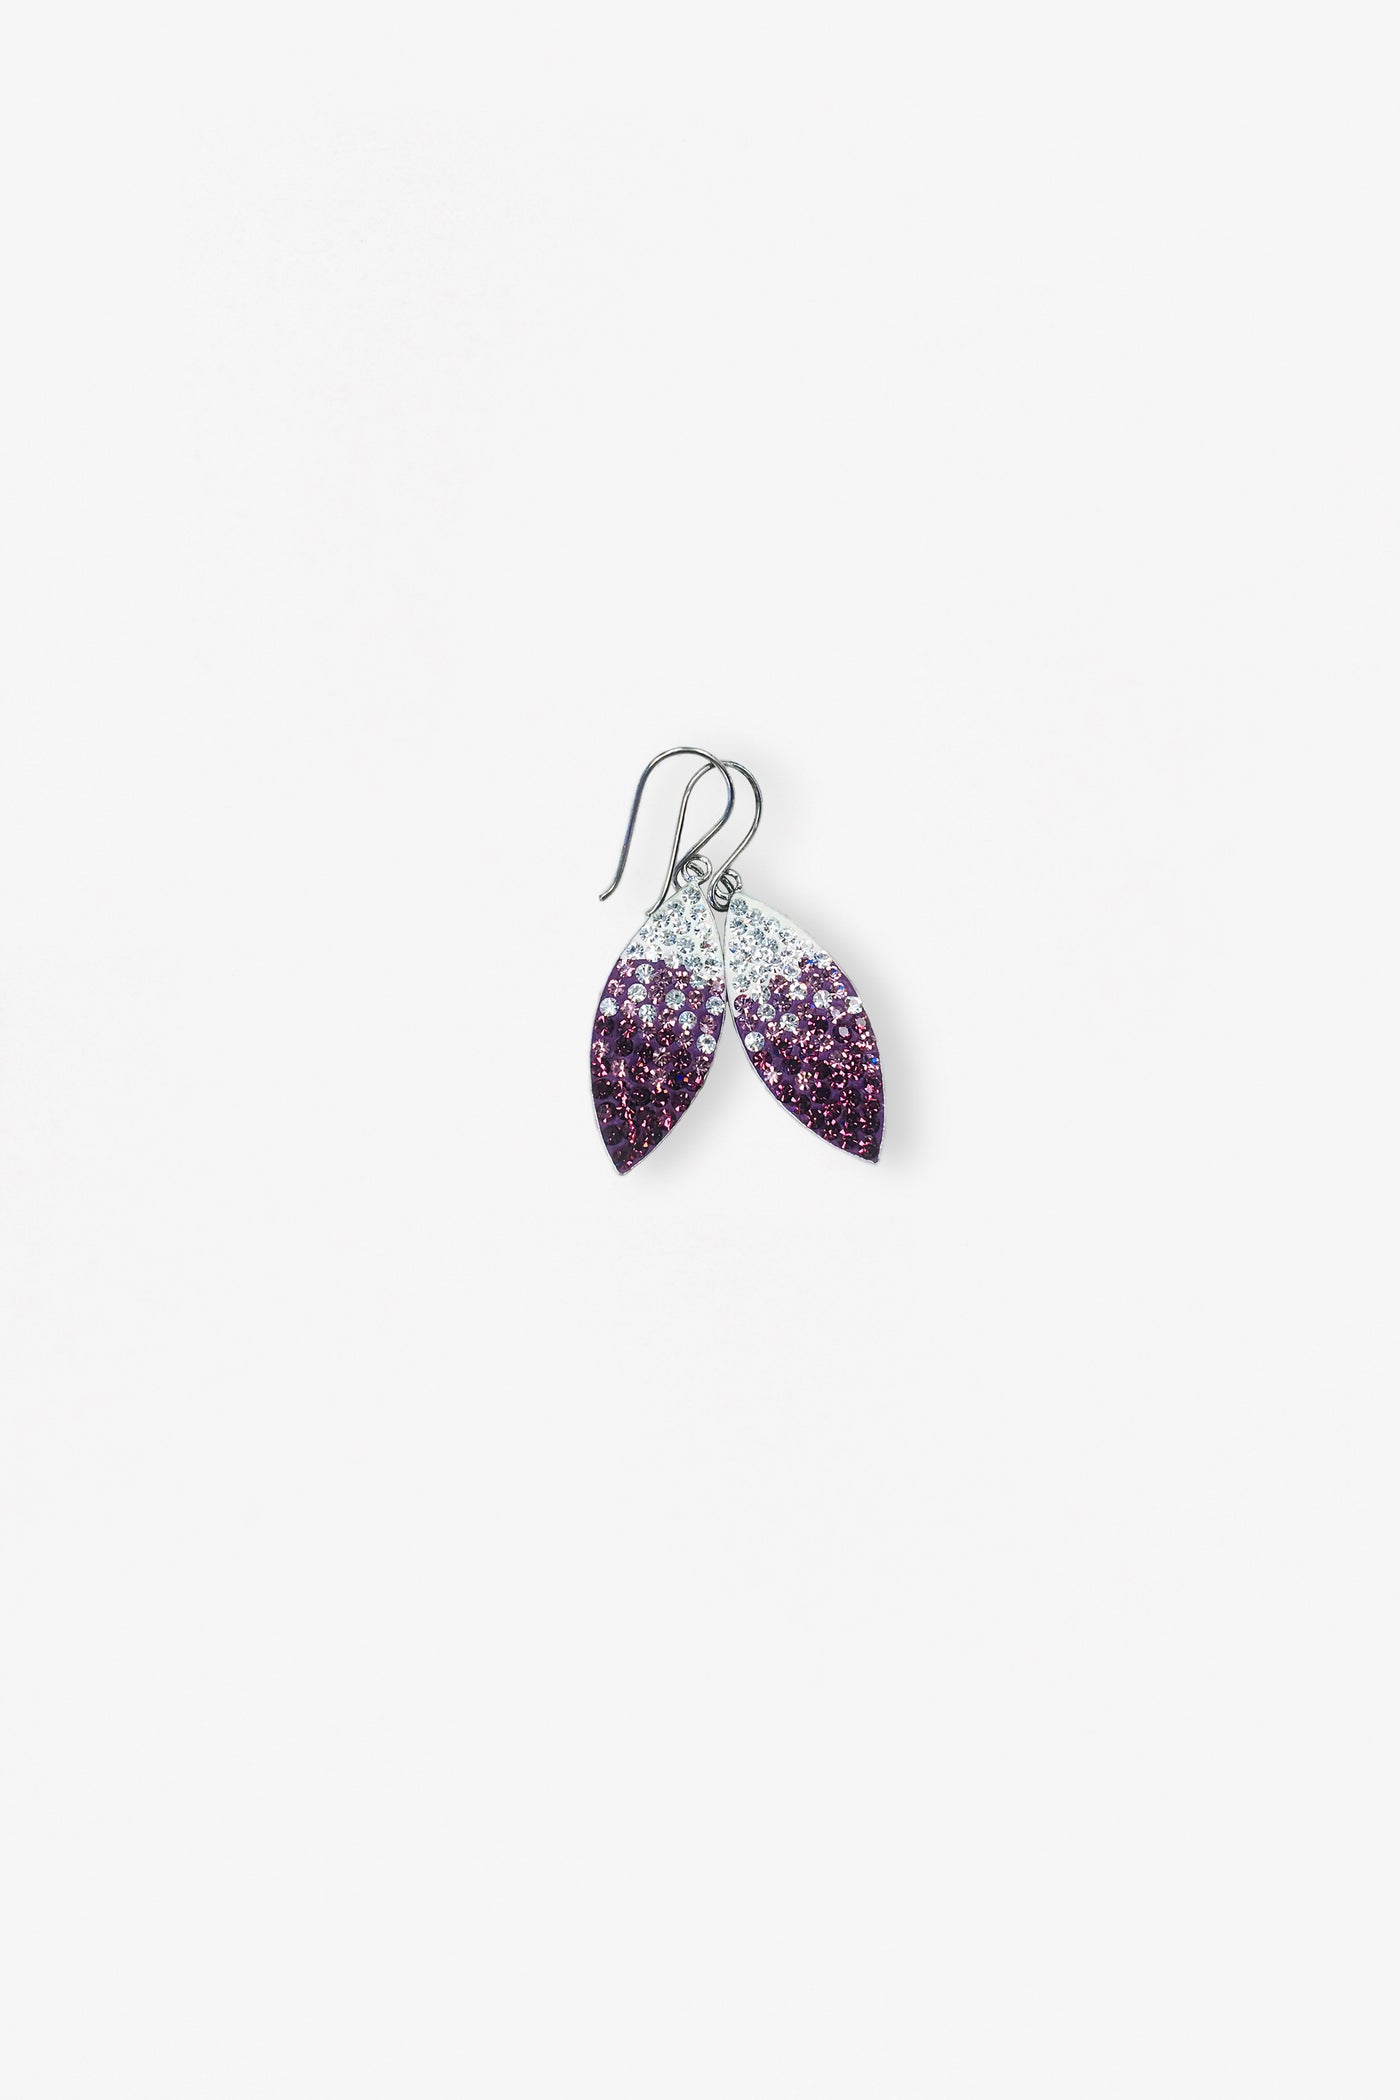 Marquise Pave Ombre Crystal Sterling Silver Earrings in Amethyst | Annie and Sisters